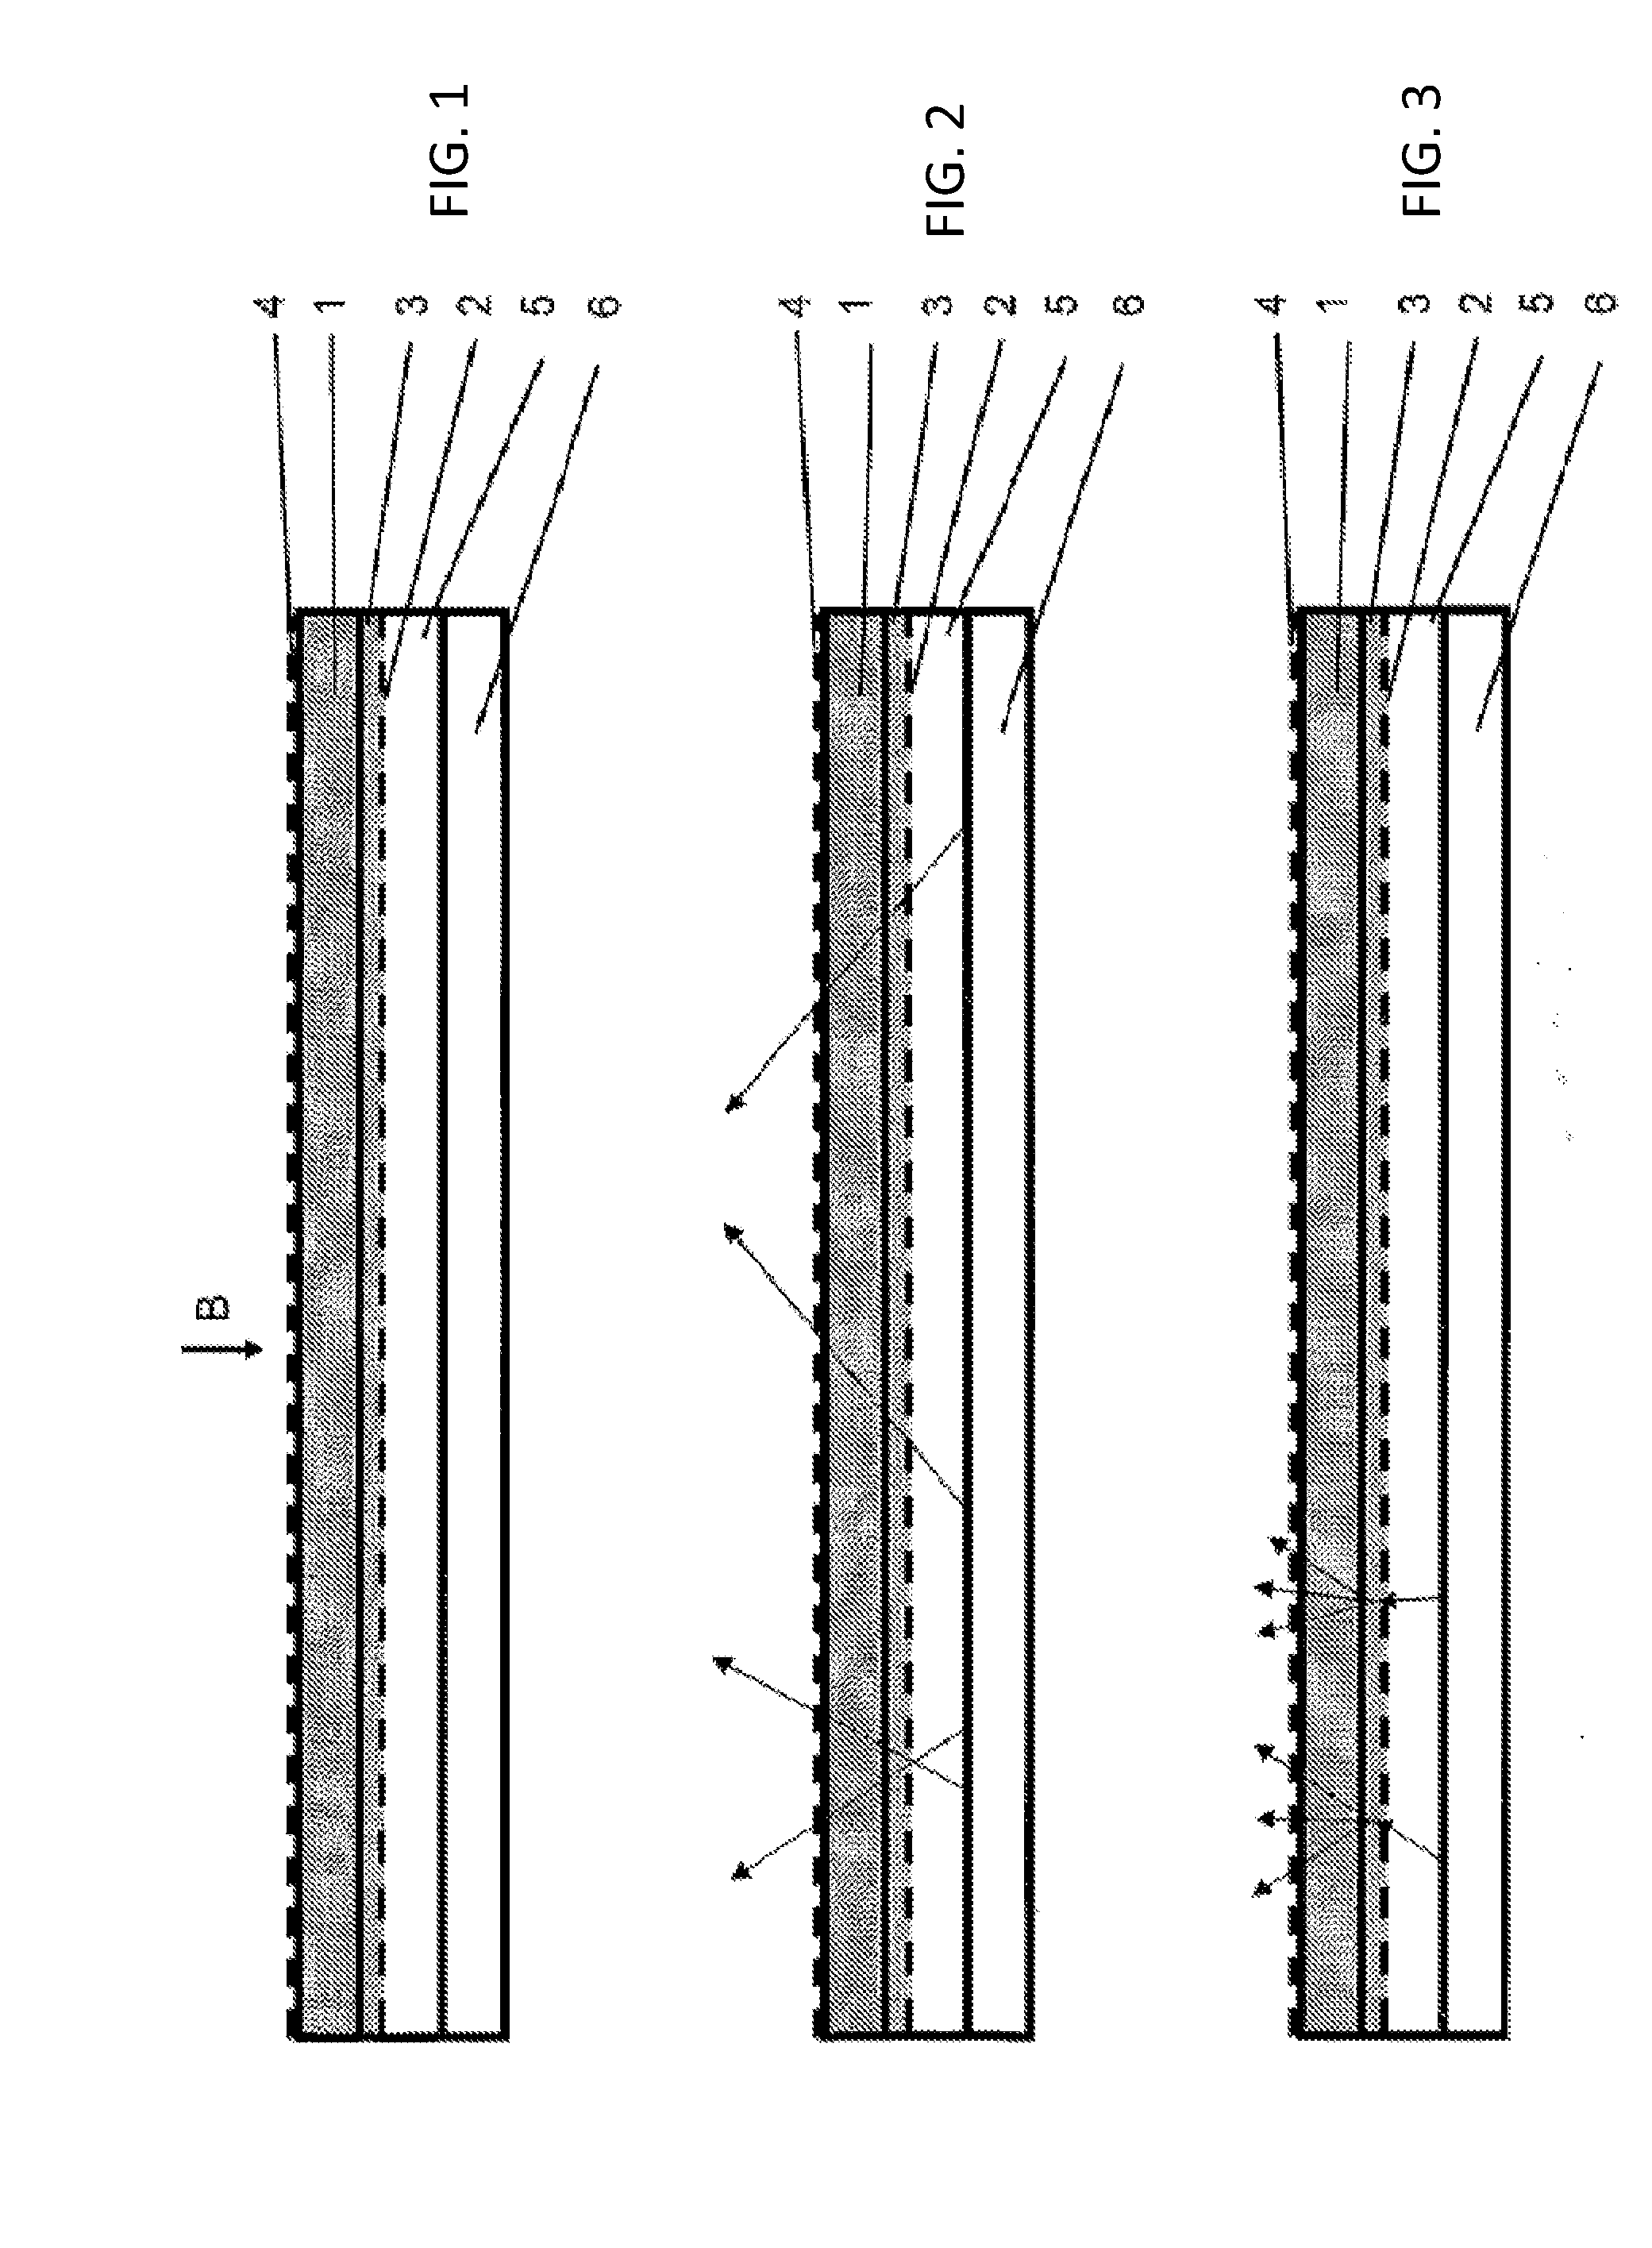 Assembly for the selective three-dimensional or two-dimensional representation of images